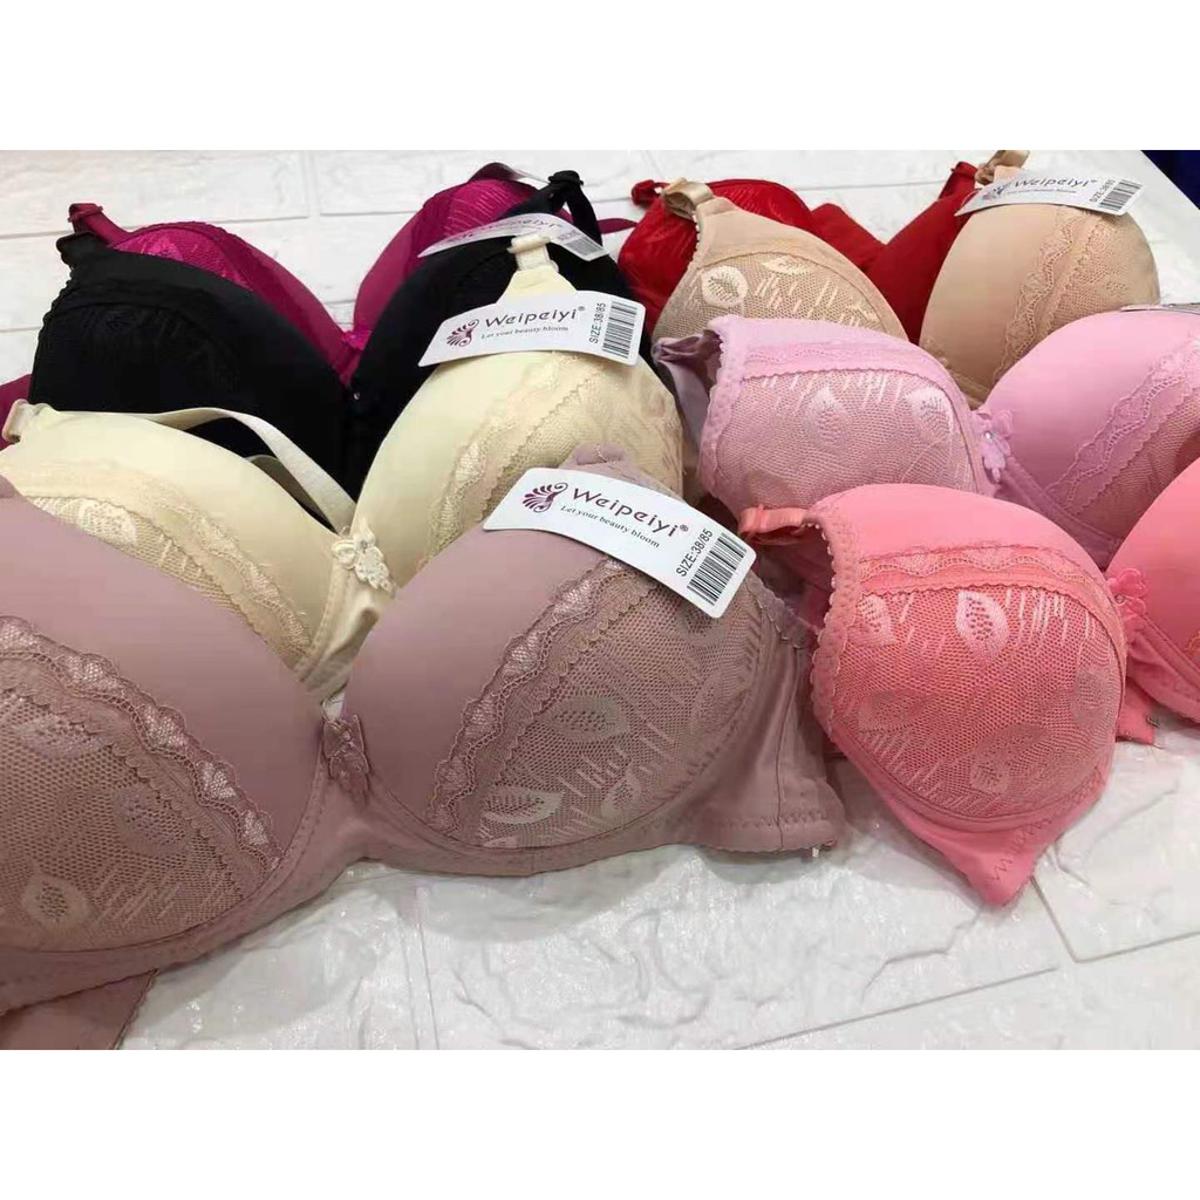 pack of 1-foam bra good quality (size 32 to 42) high recommended